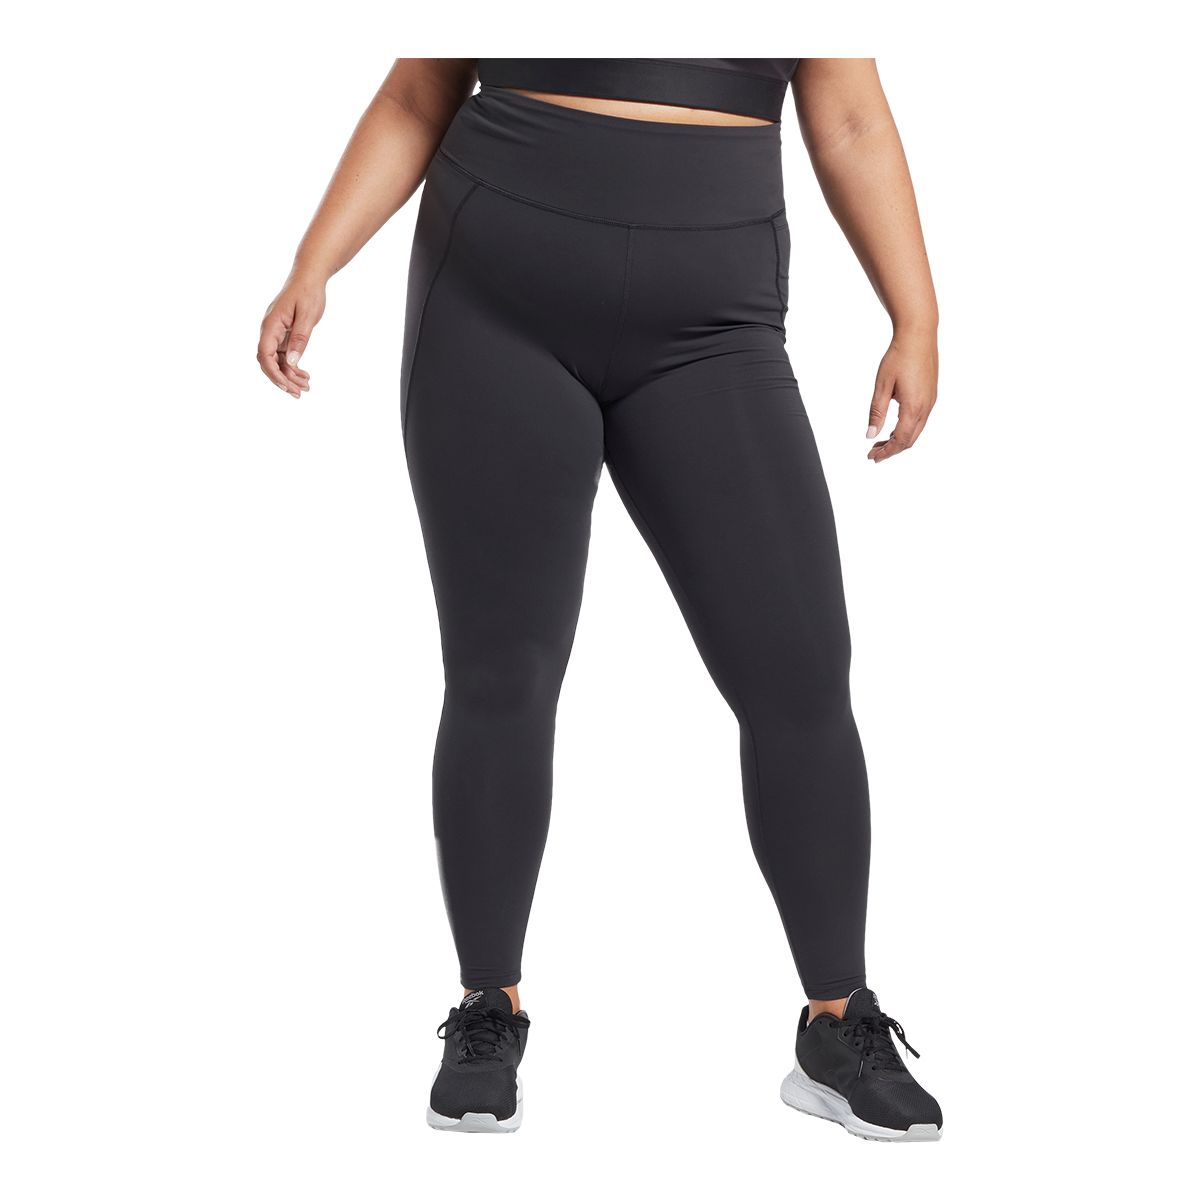 Image of Reebok Women's Lux High Raise Tights